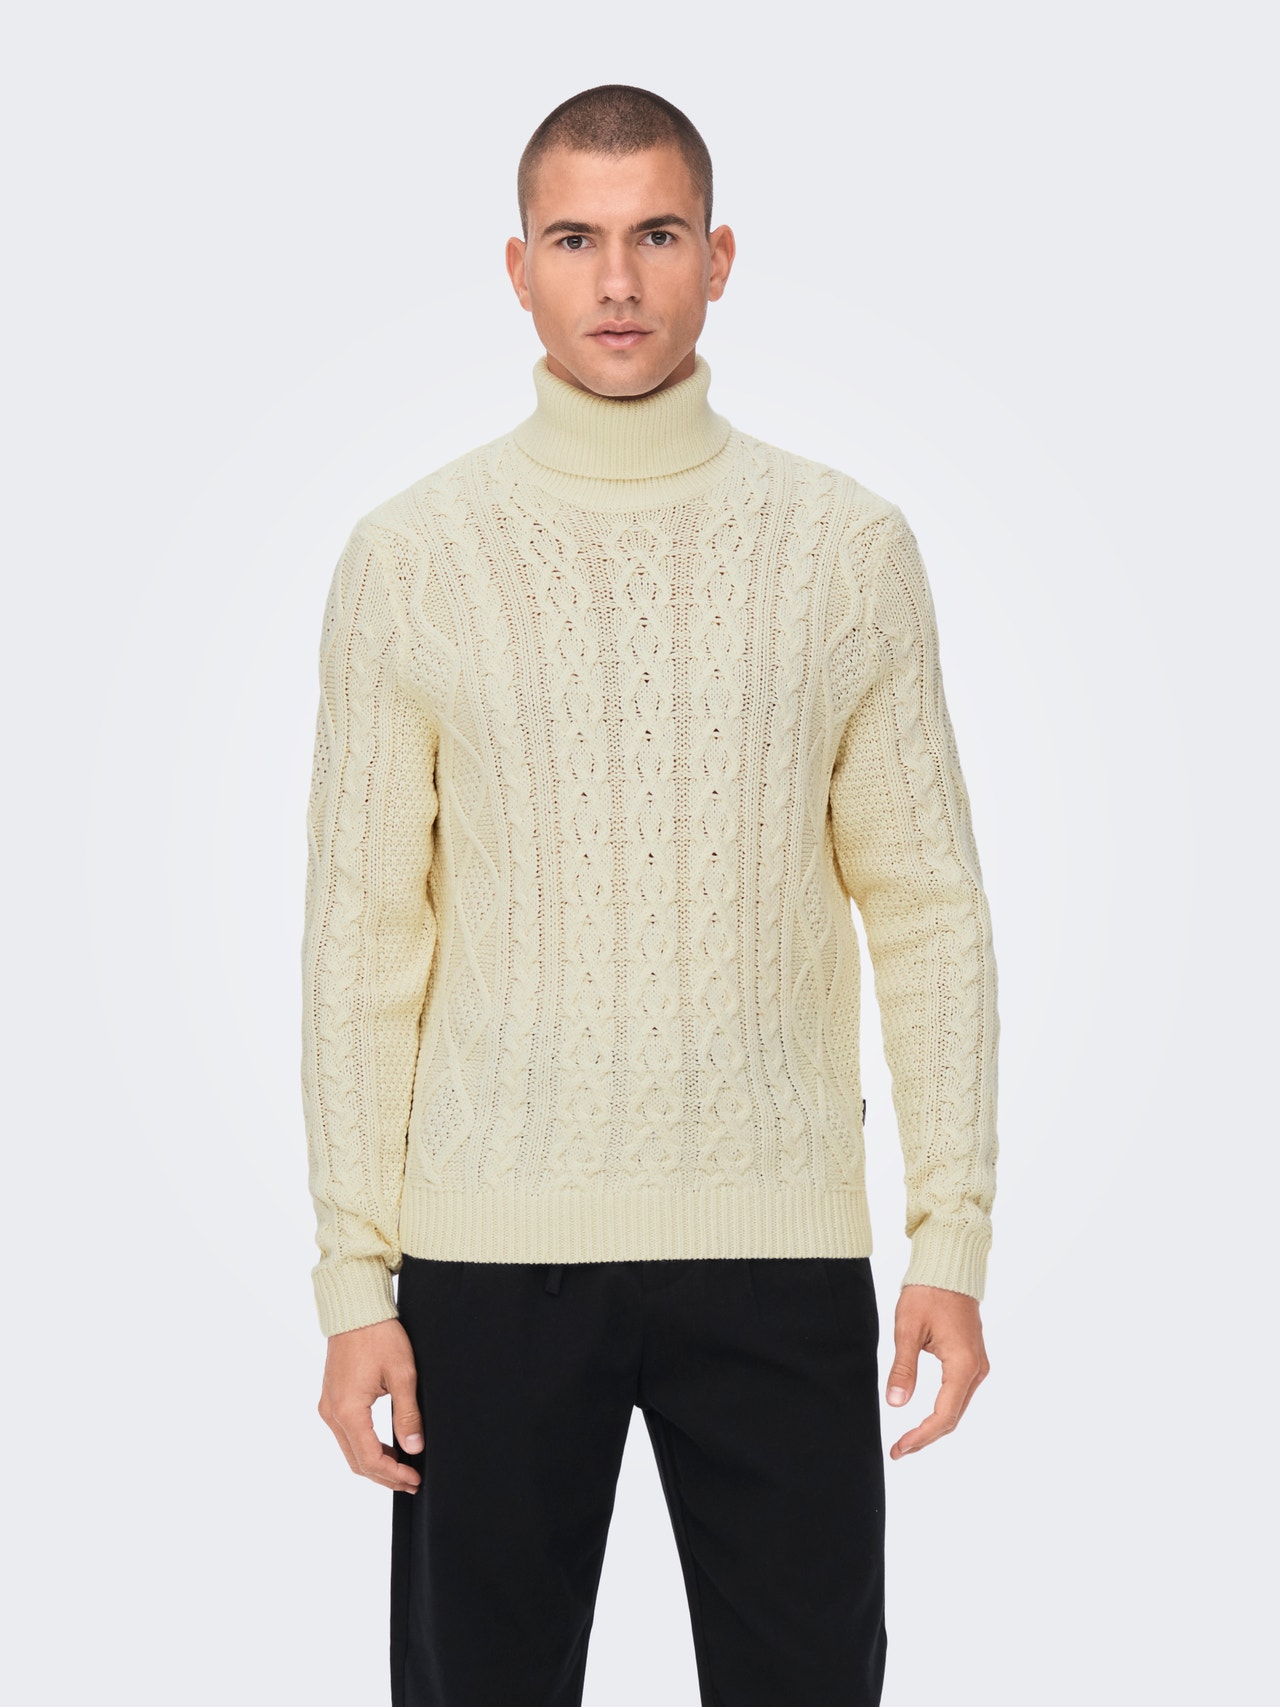 ONLY & SONS Roll neck knitted pullover -Antique White - 22023164